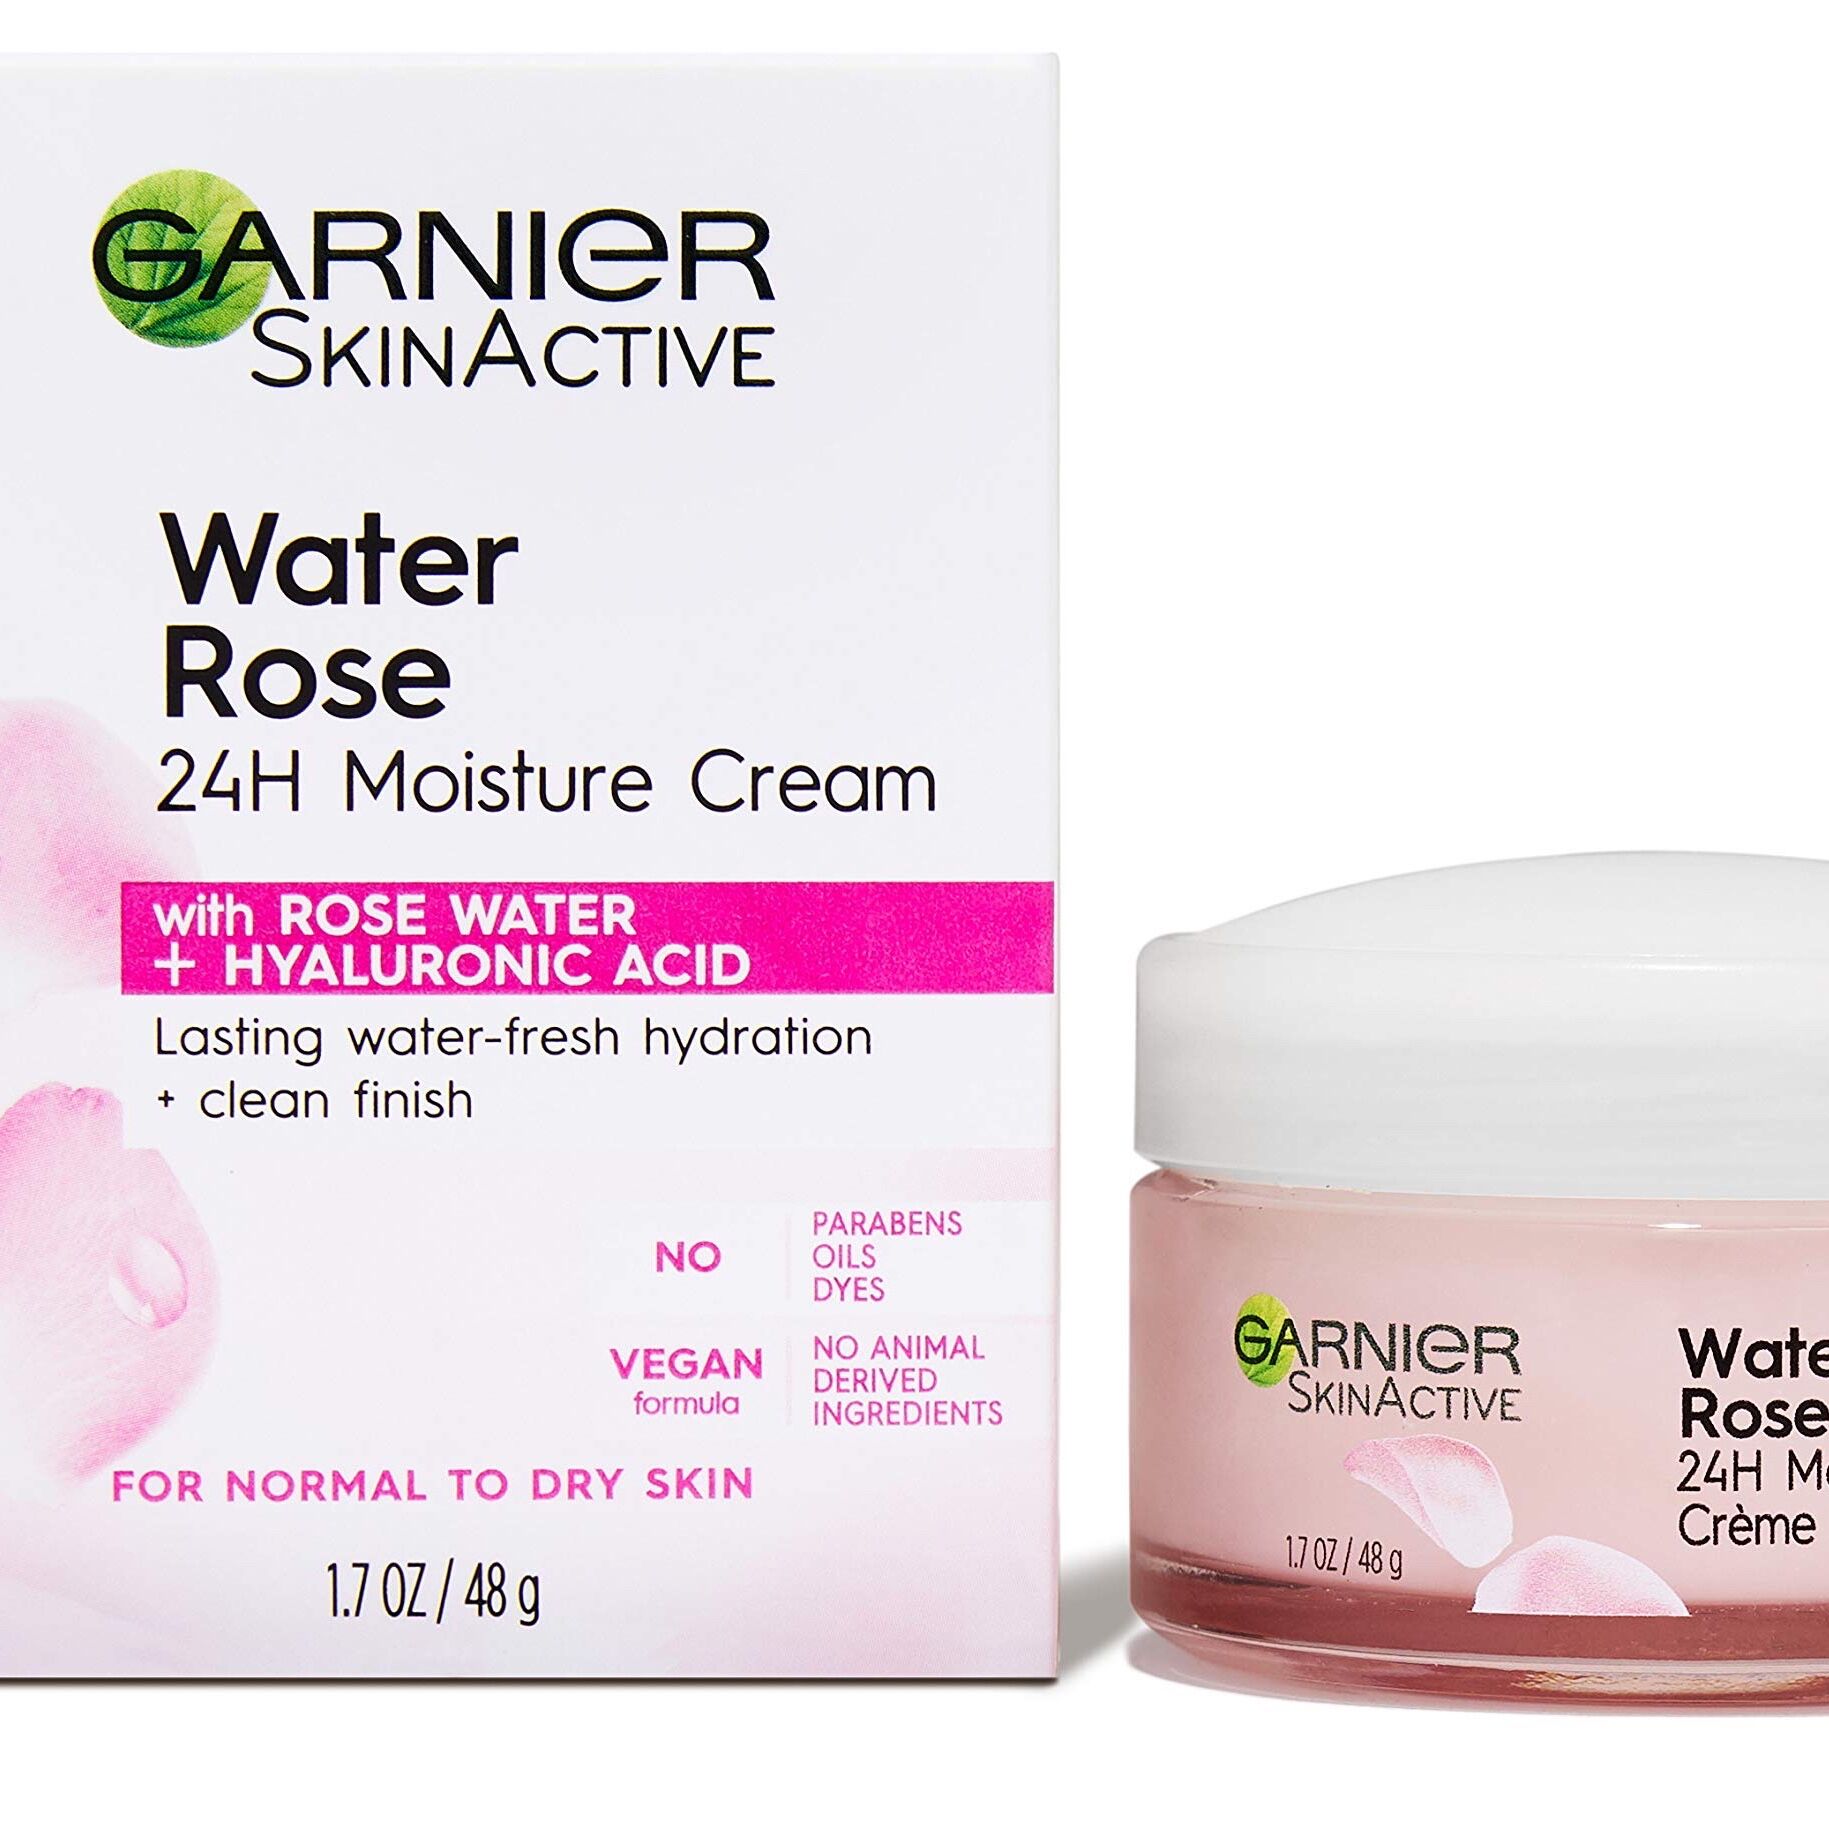 GARNIER with rose water and hyaluronic acid